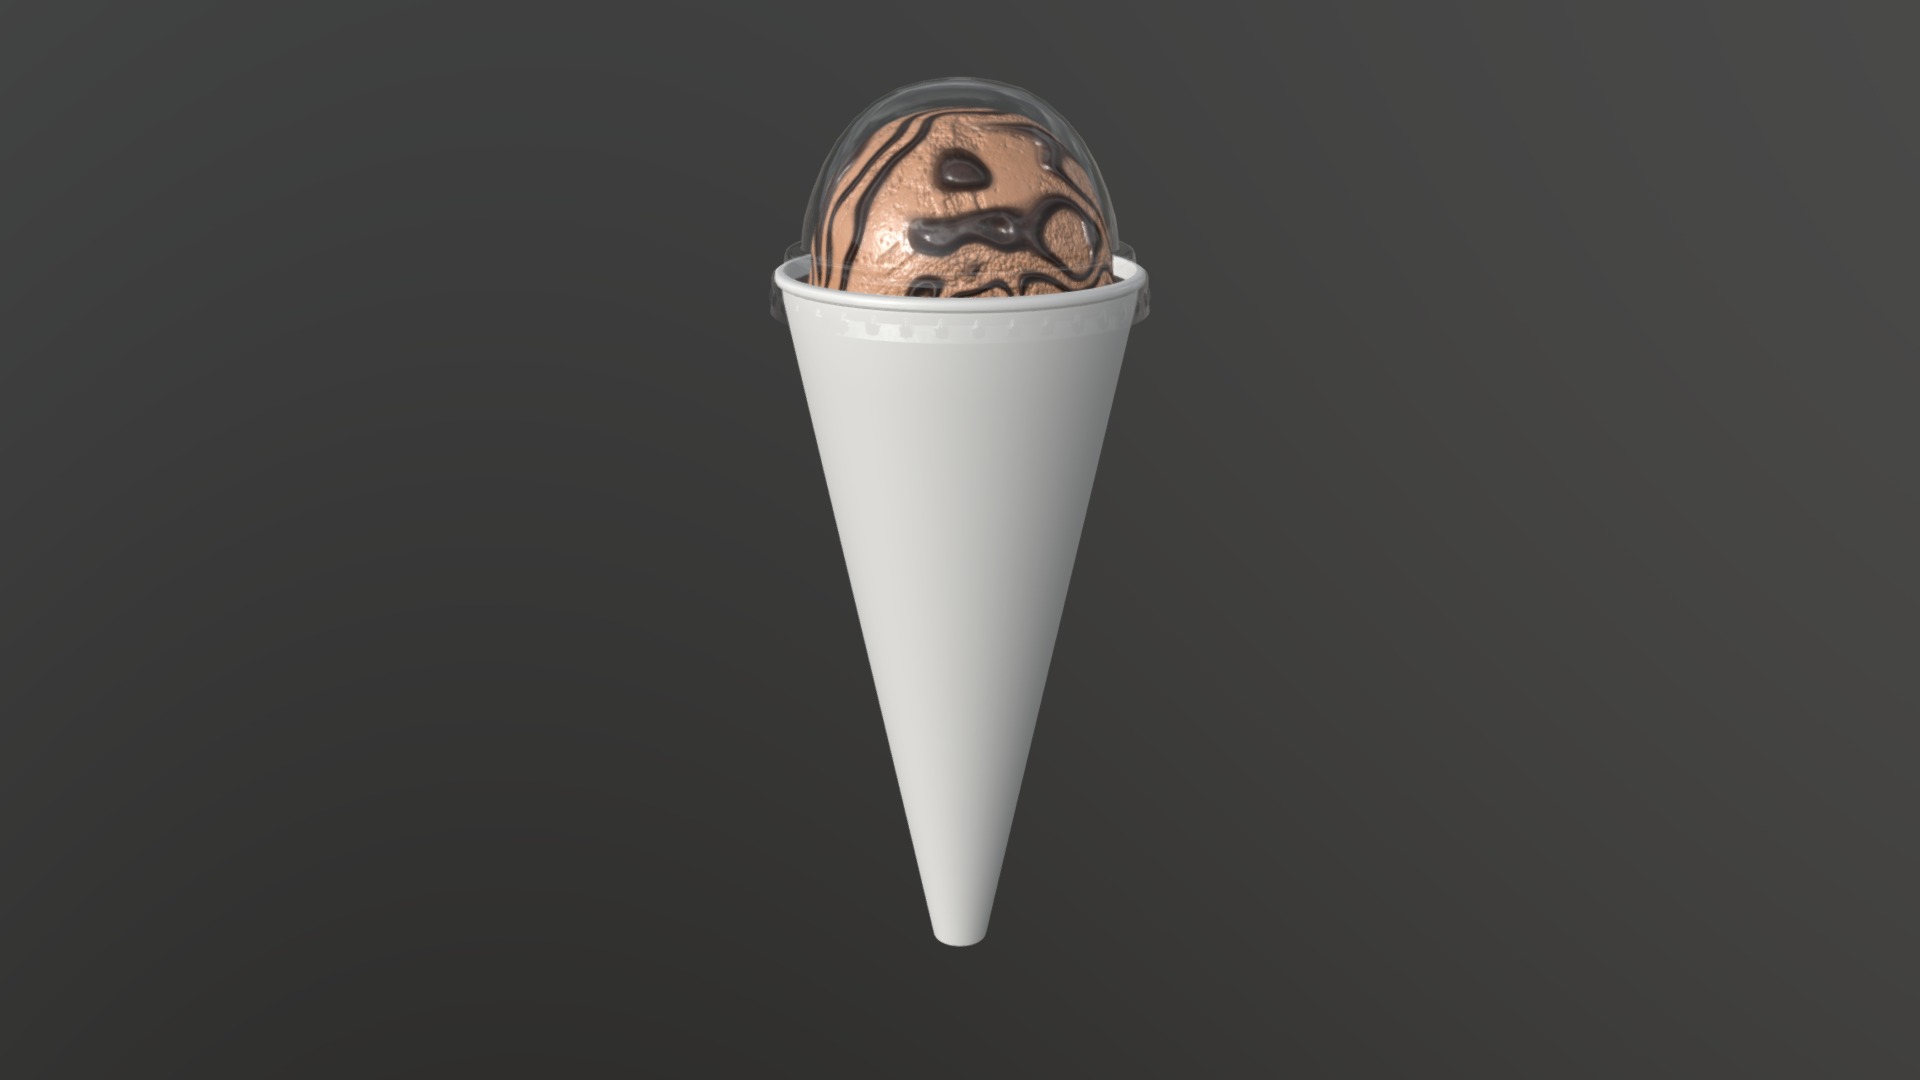 3D model Ice cream cone paper package for mockup - This is a 3D model of the Ice cream cone paper package for mockup. The 3D model is about a white cup with a brown liquid in it.